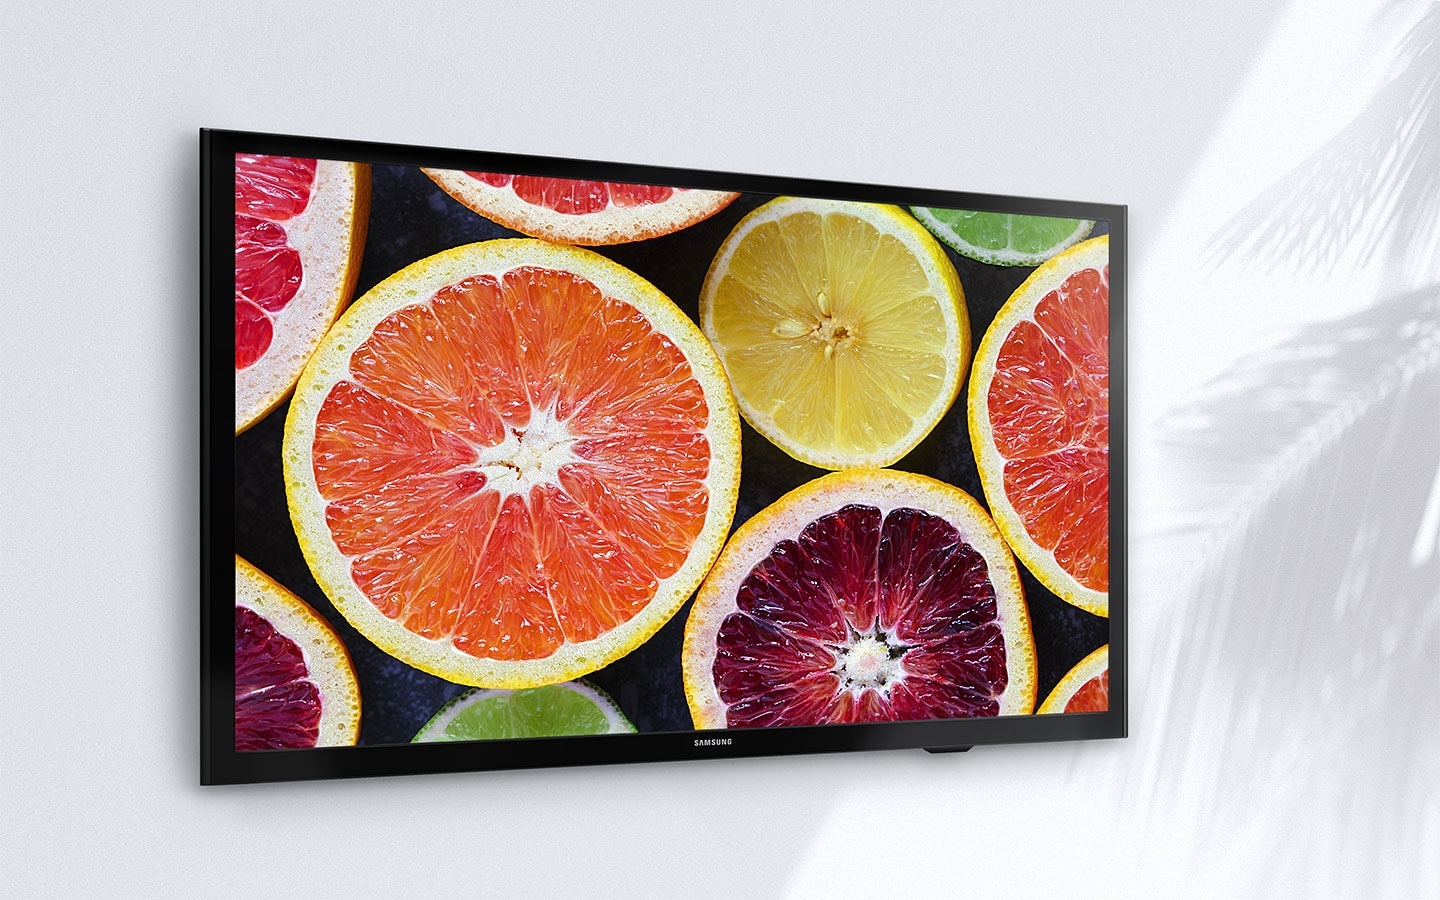 Clear, detailed picture in 32 inch Full HD LED TV